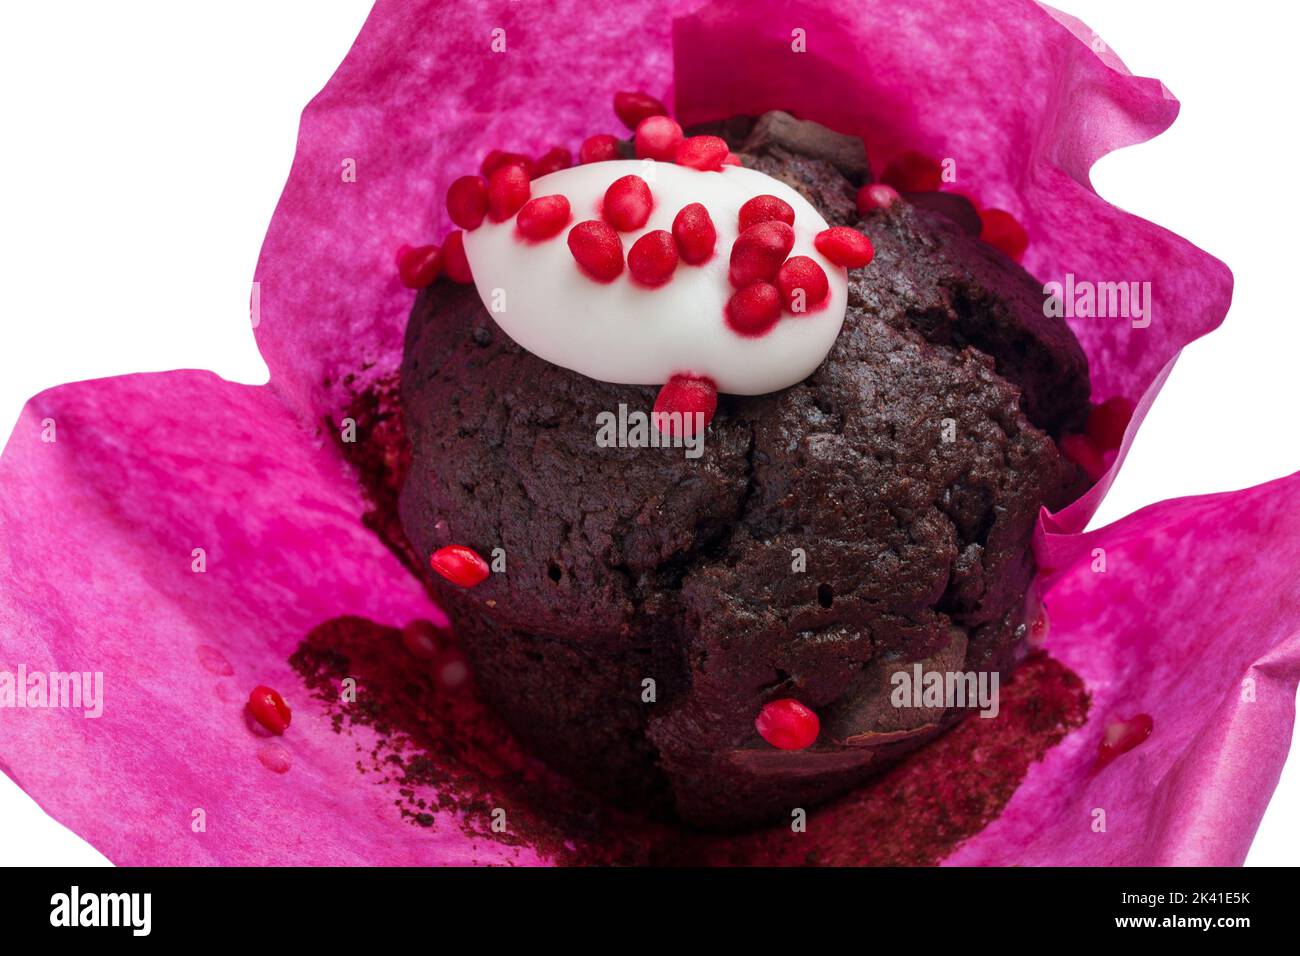 Black Forest Muffin by Sainsbury's from Sainsbury's, boulangerie en magasin sur fond blanc Banque D'Images